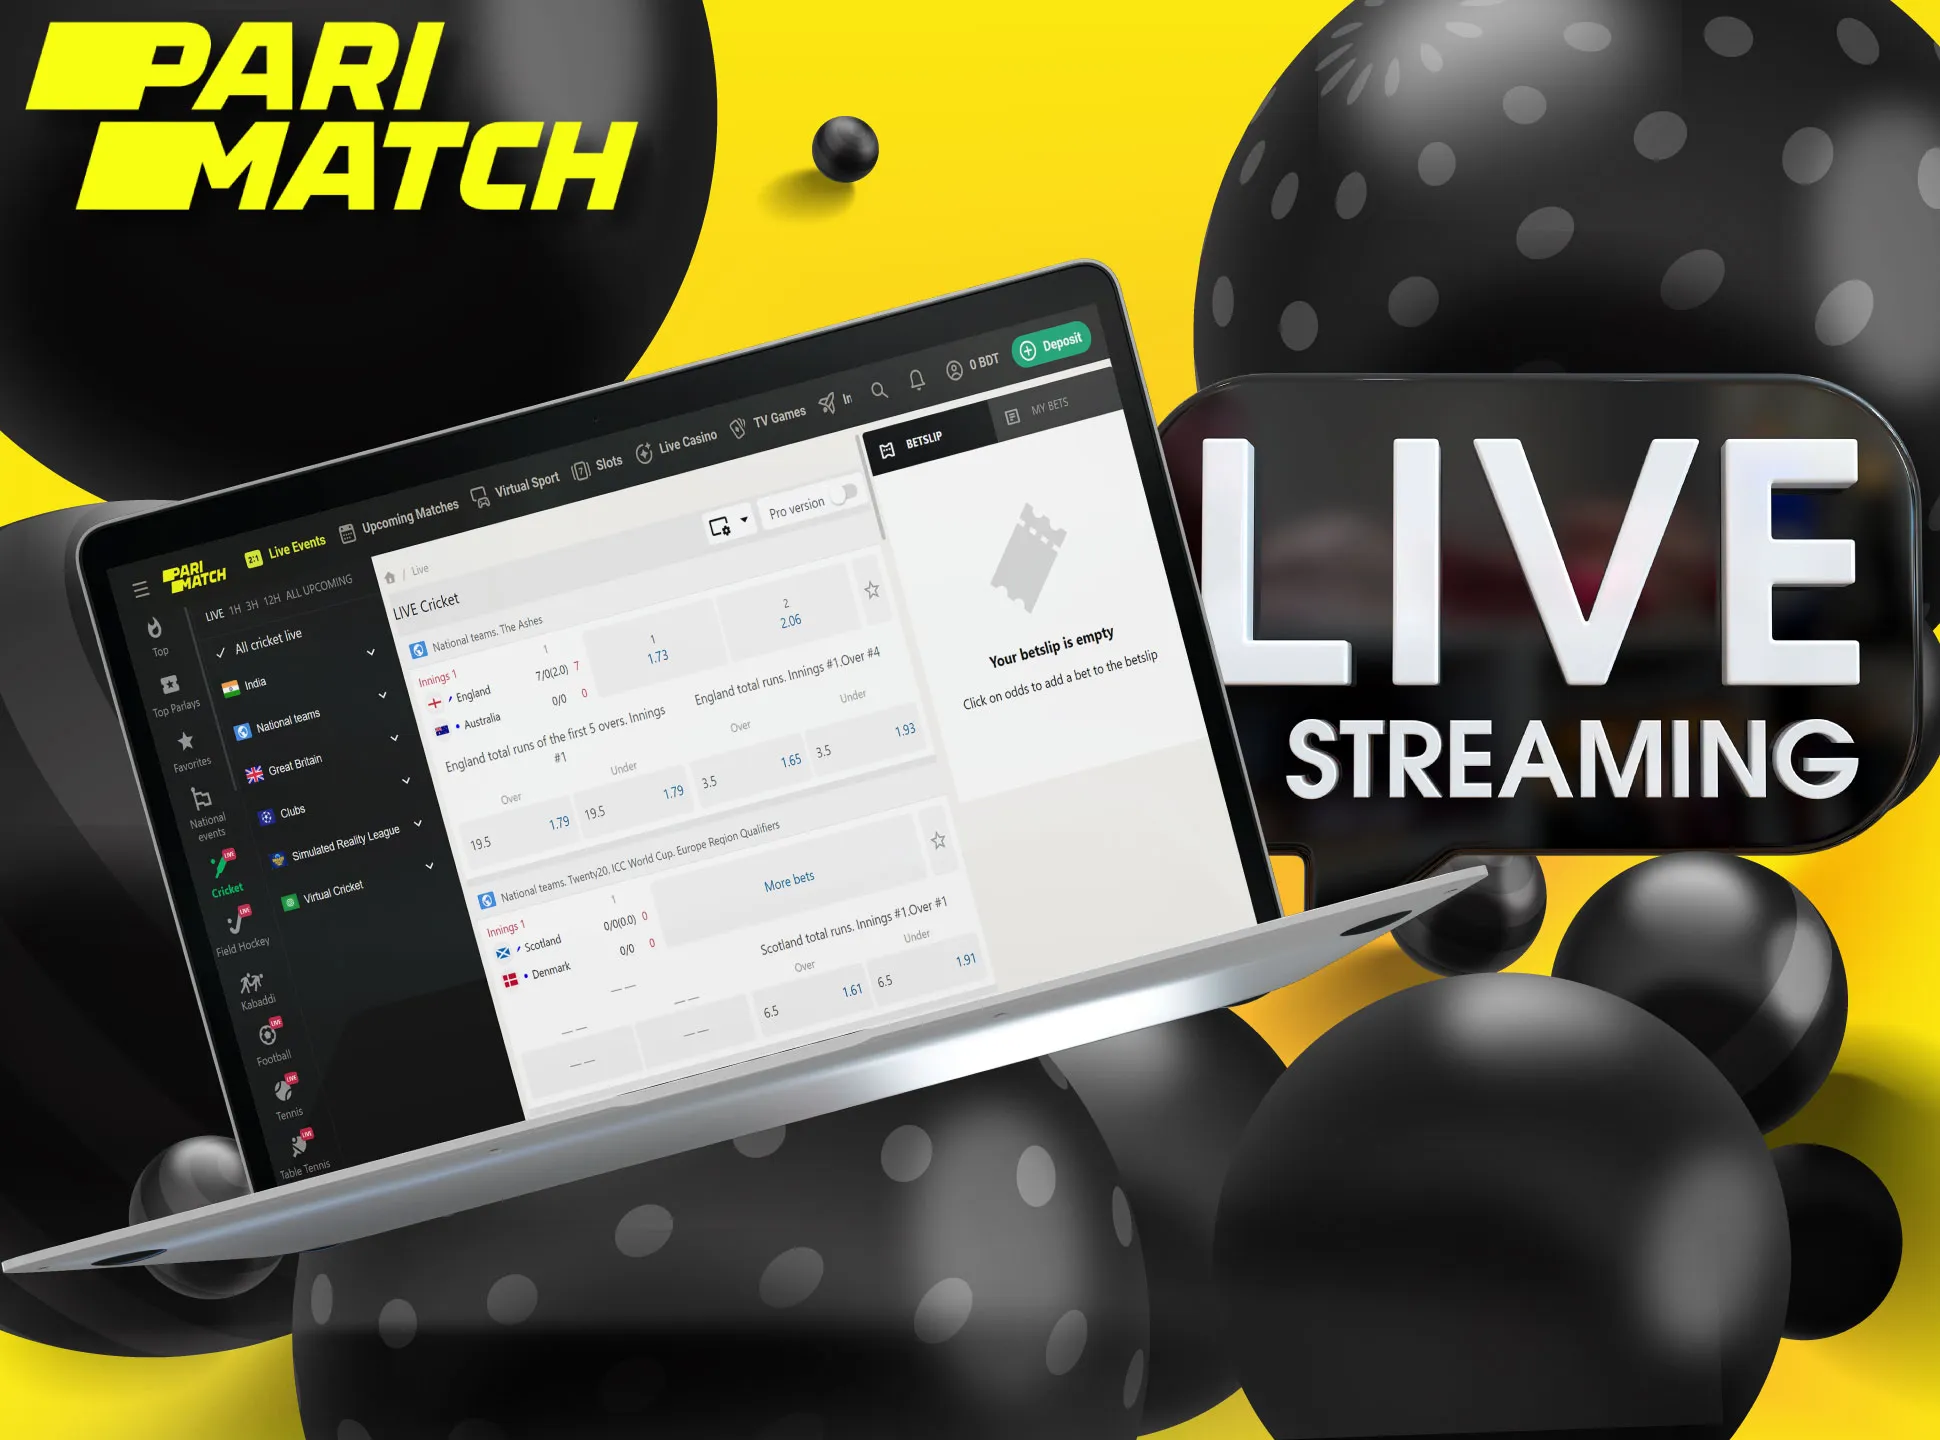 Parimatch offers live streamings on its website and in the app.